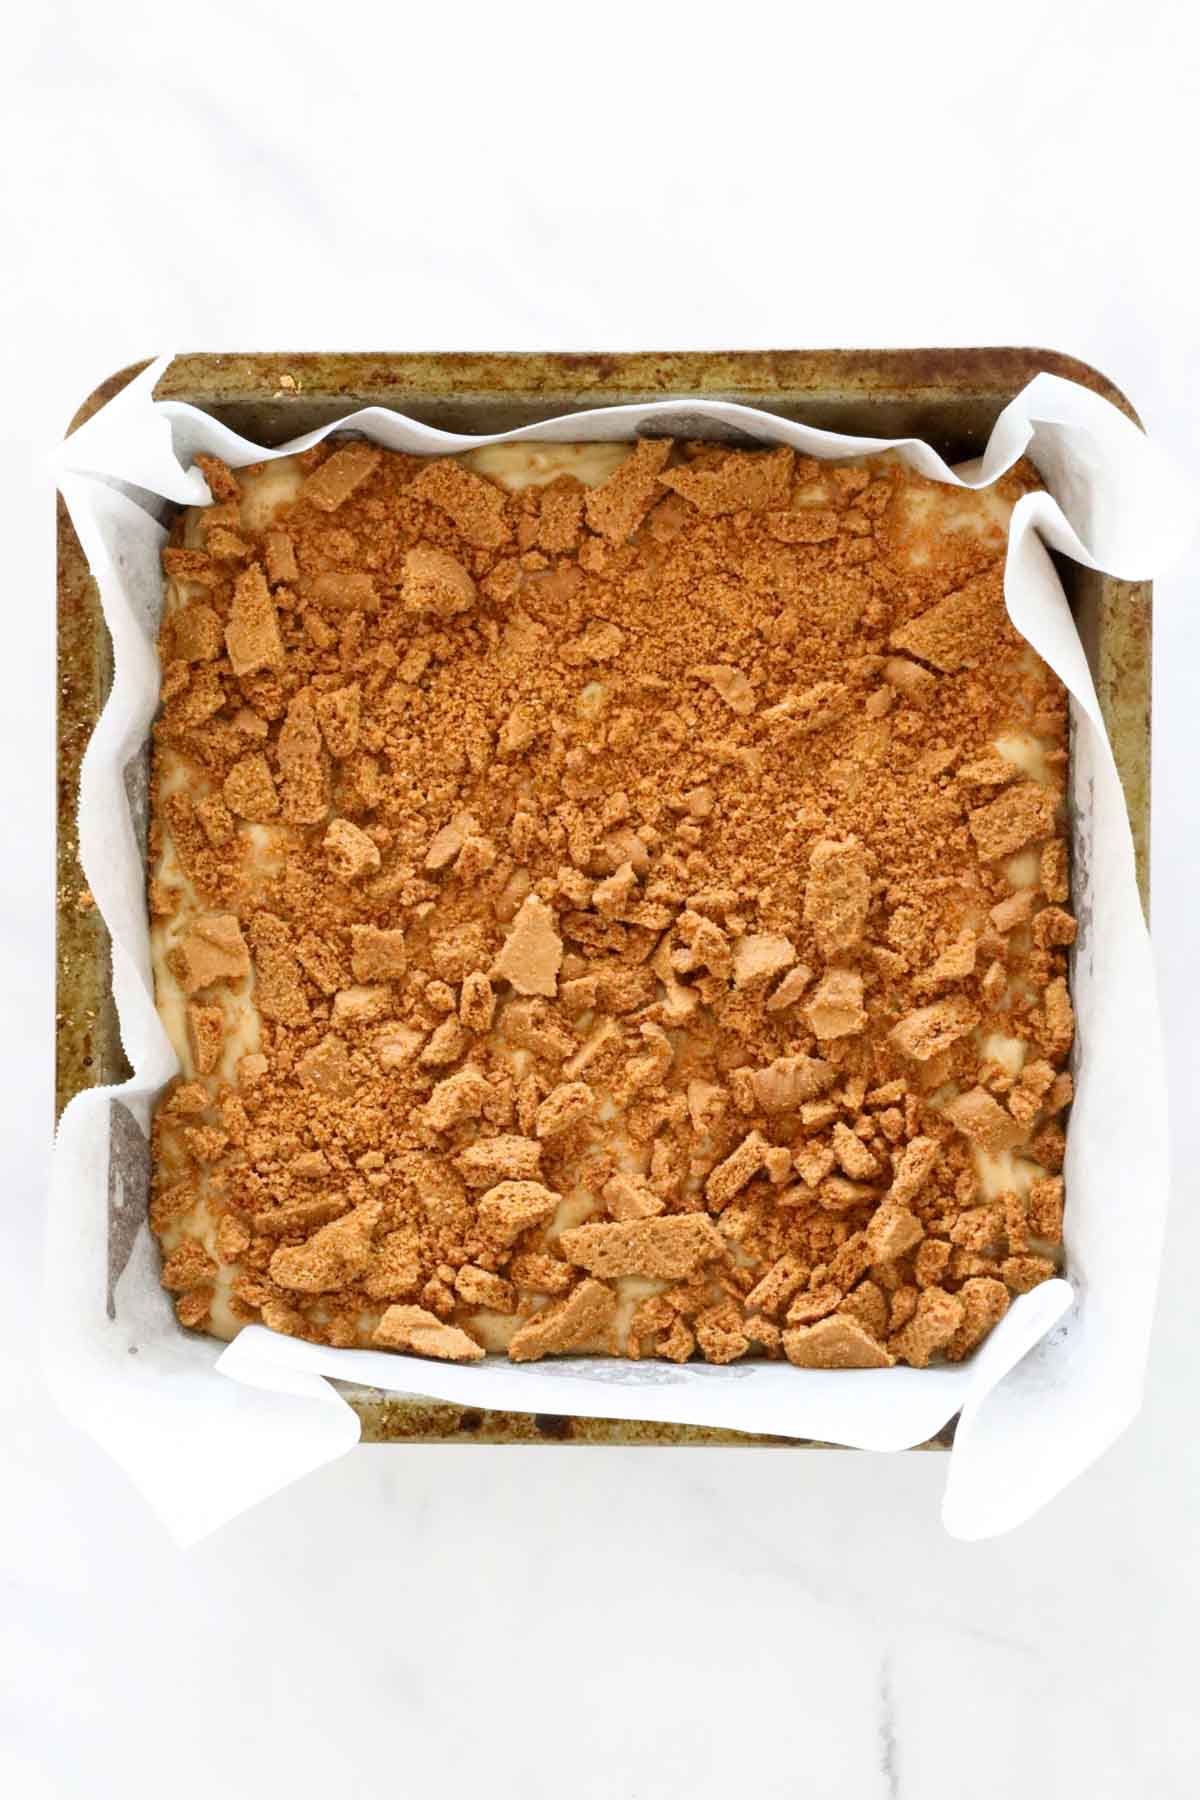 Mixture spread into a paper lined tray, with more cookie crumbs sprinkled over the top.